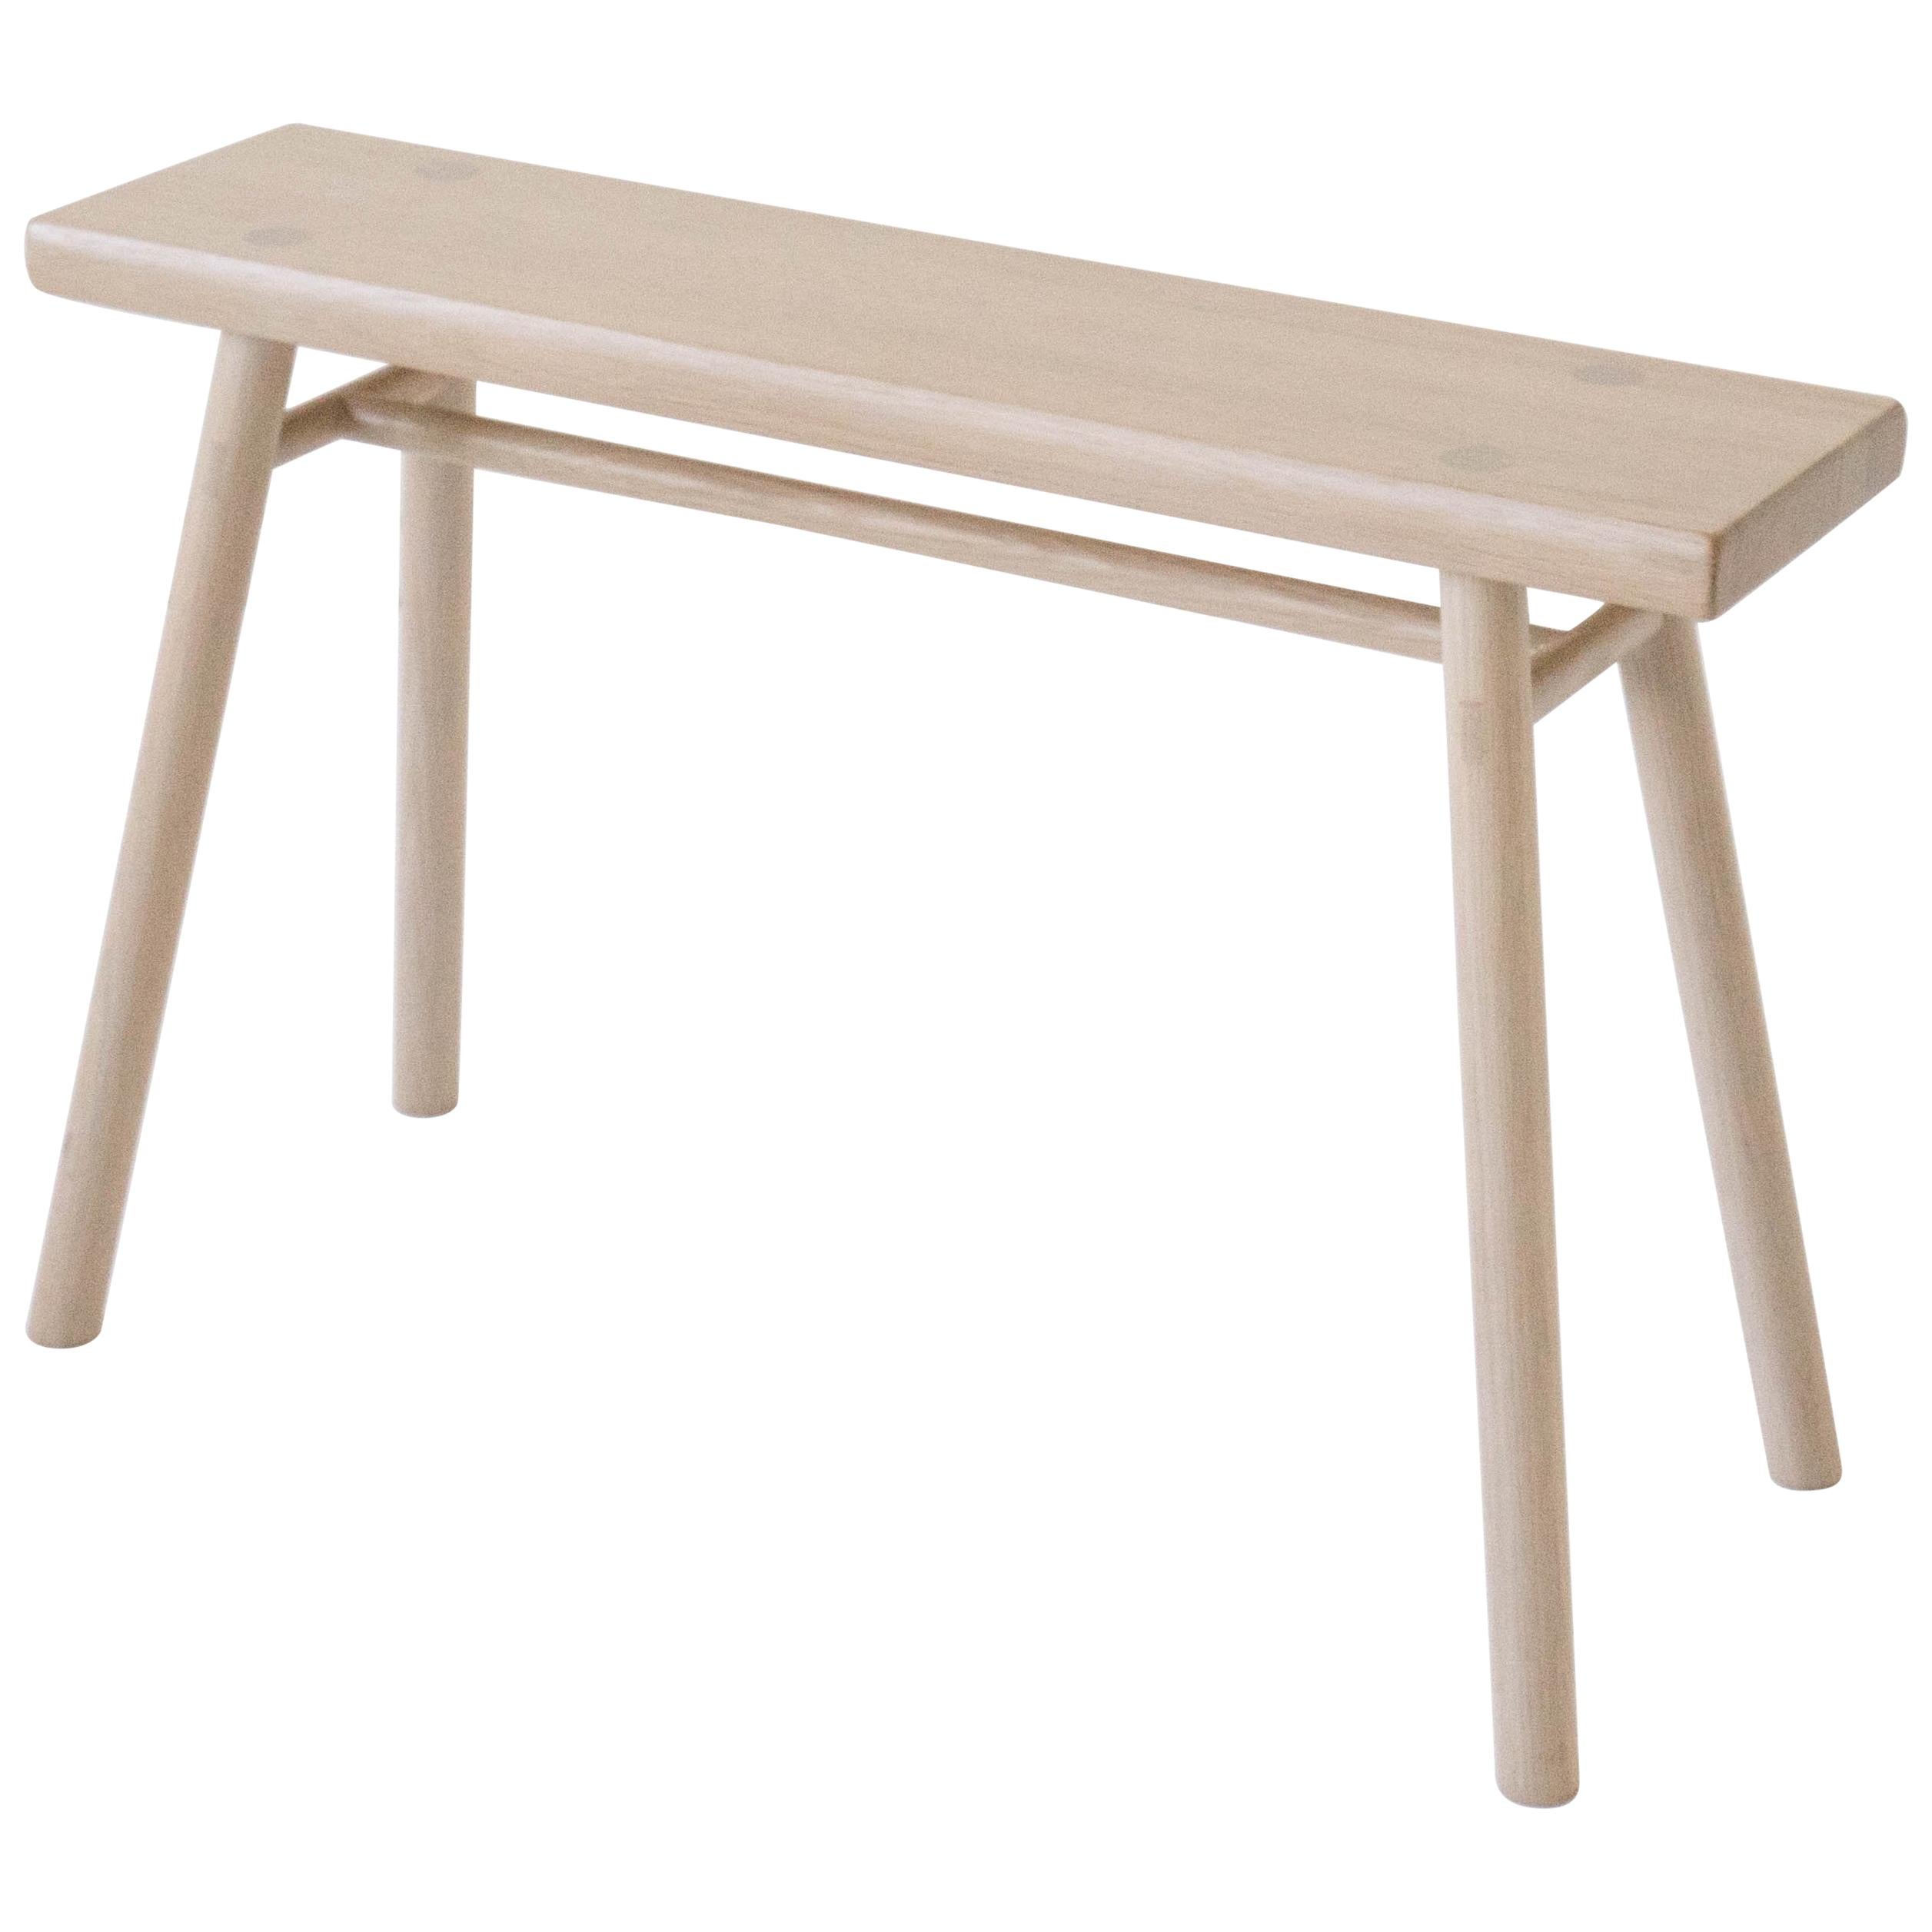 Wing Stand by Sun at Six, Nude: Minimalist Stool / Bench / Side Table in Wood